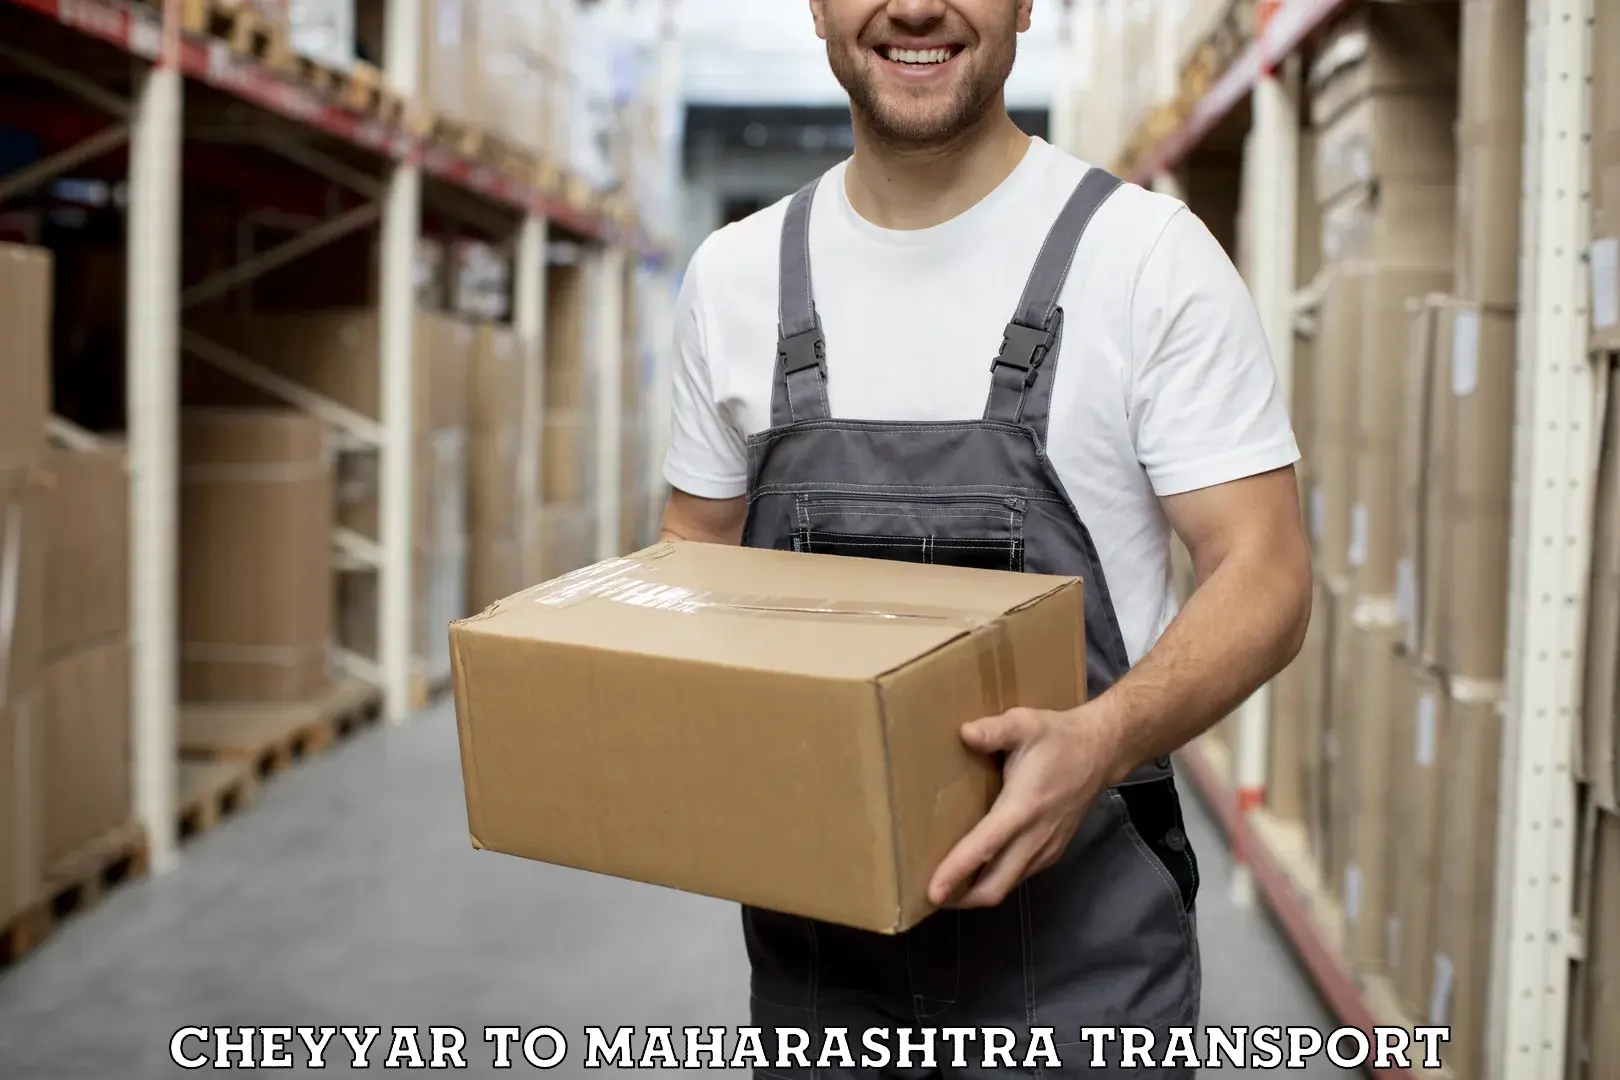 Container transport service Cheyyar to Pune